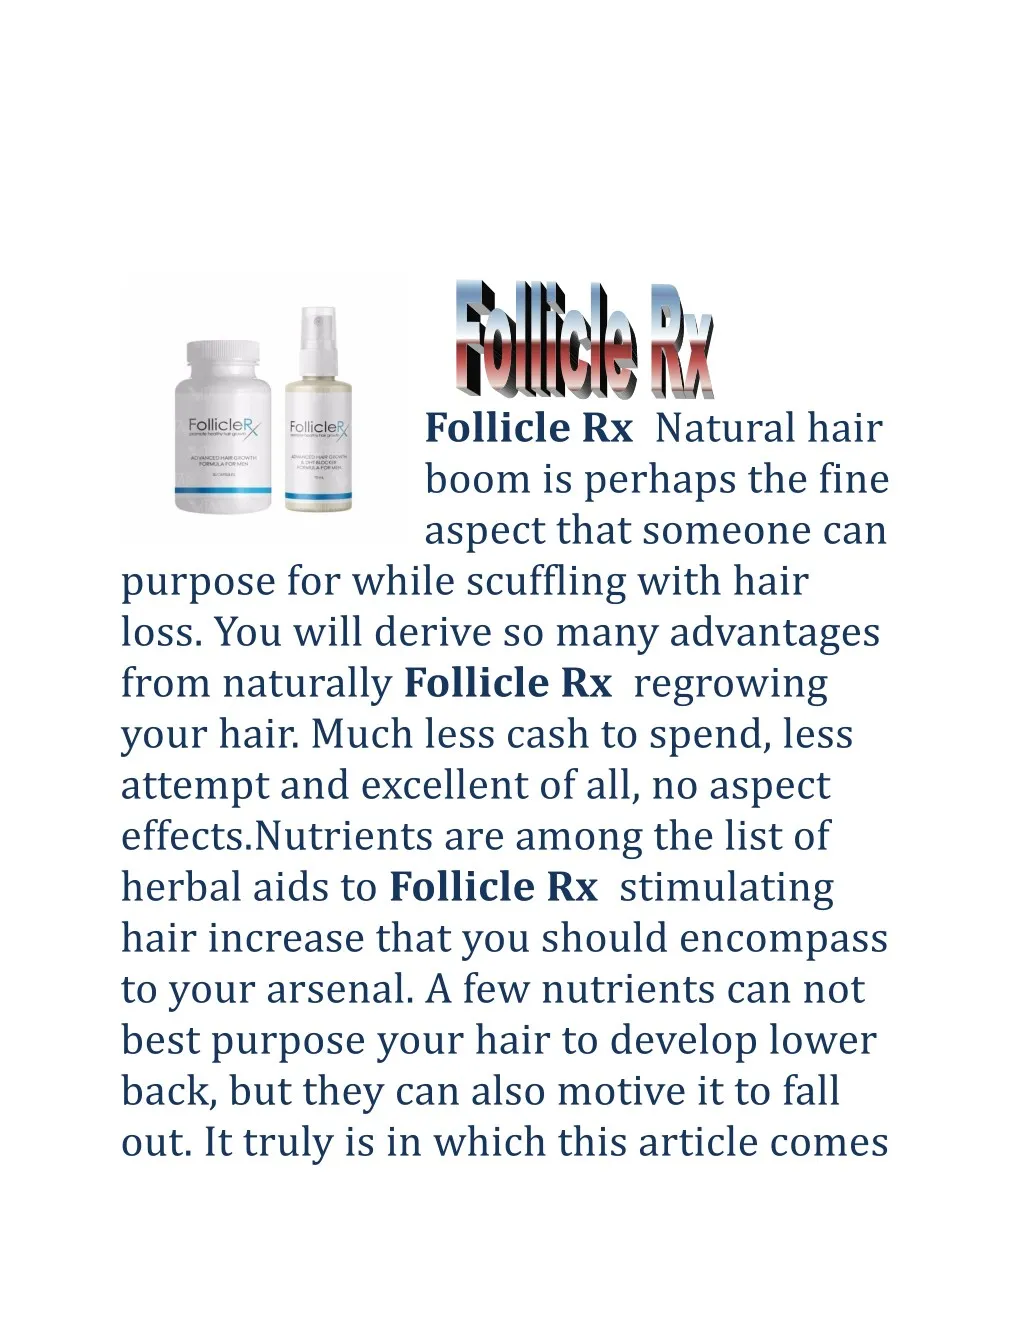 follicle rx natural hair boom is perhaps the fine